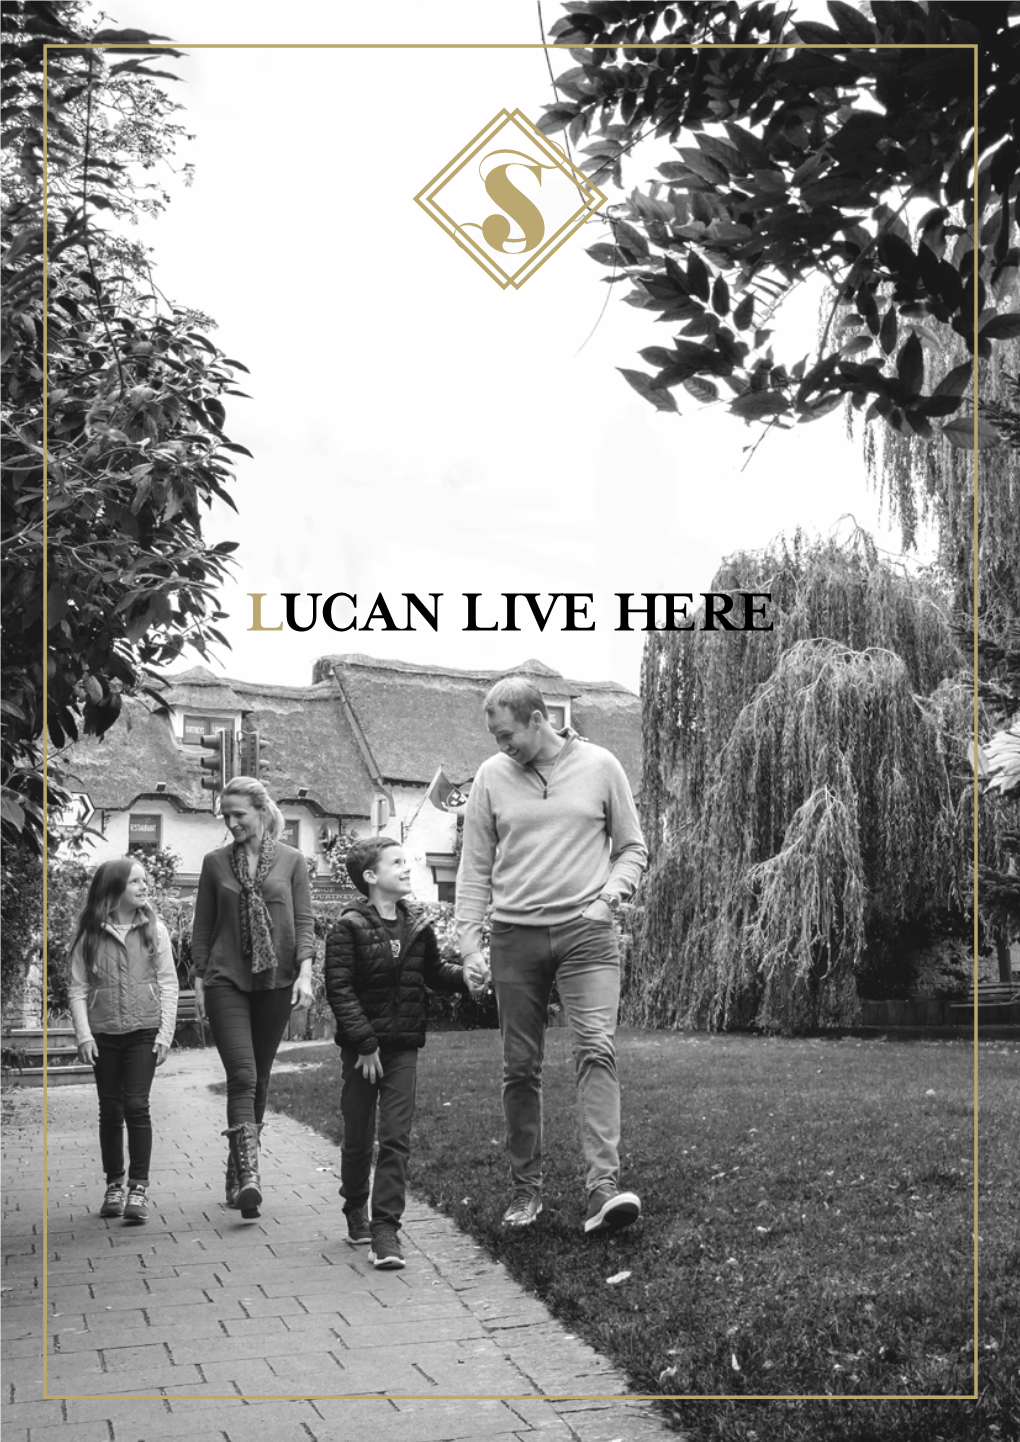 LUCAN LIVE HERE Family Life Is Brought to a New Level at Somerton, a Castlethorn Development of Superior Homes in the Heart of Beautiful Lucan